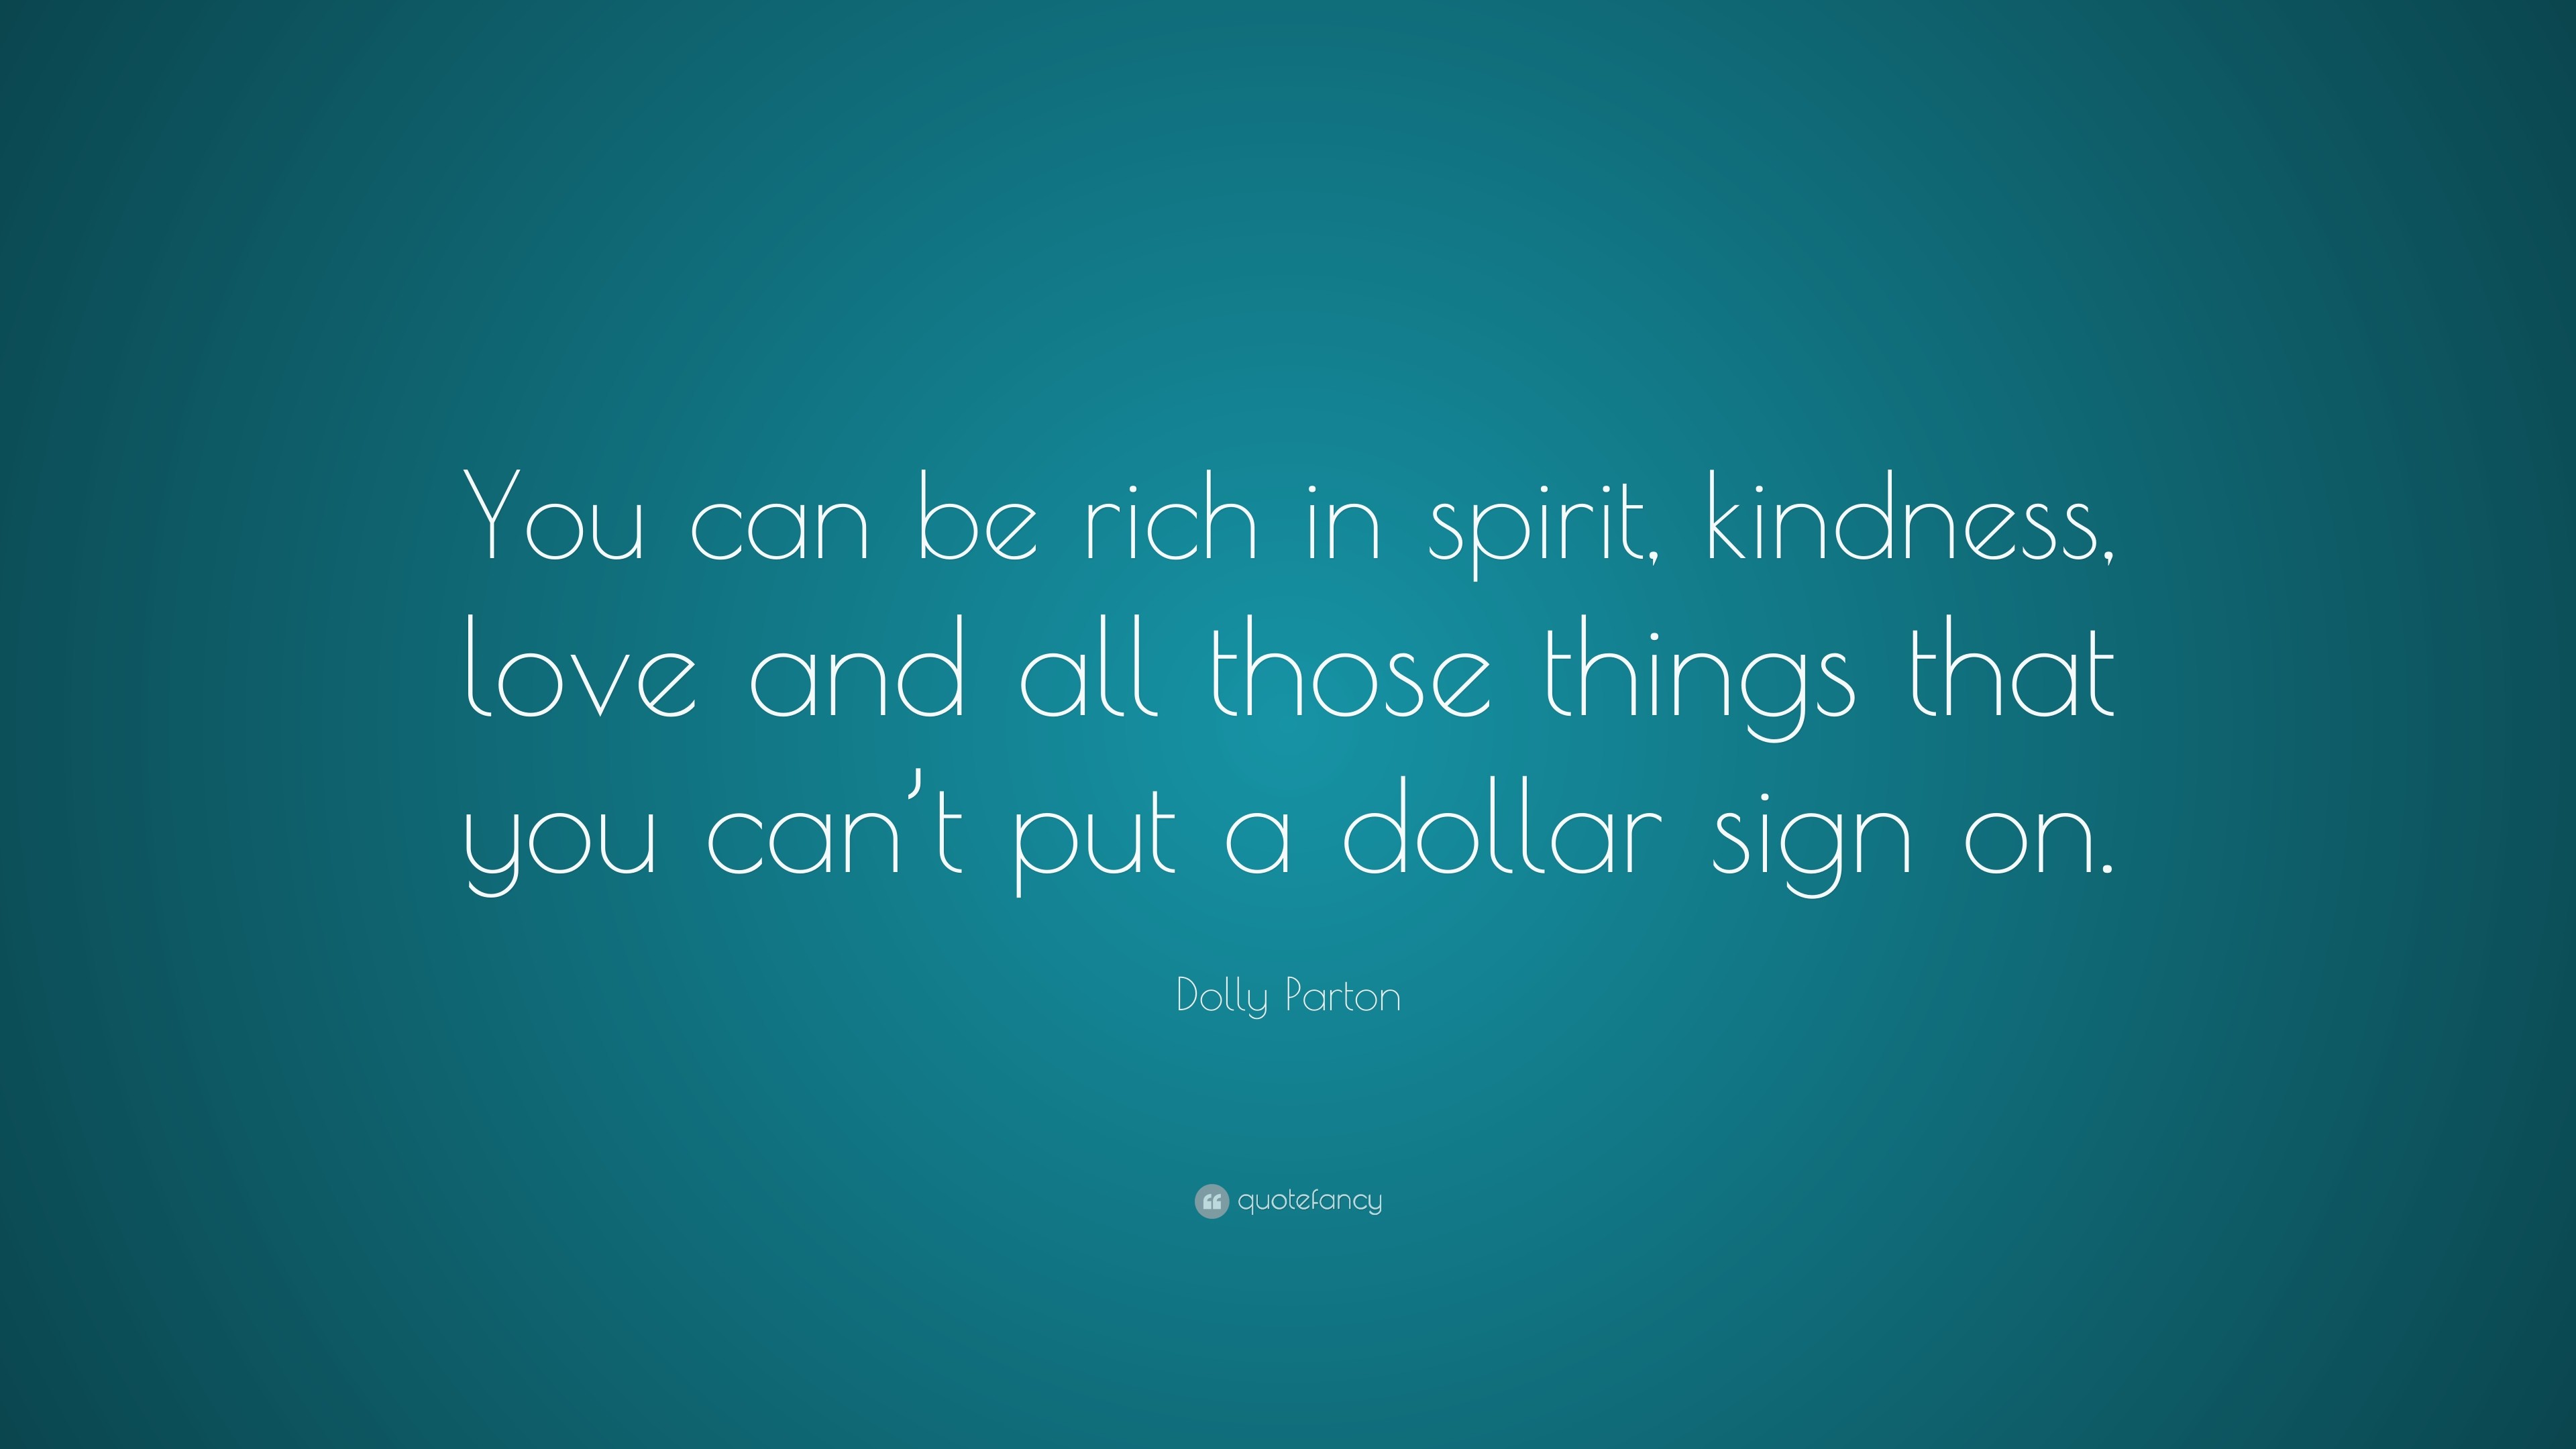 3840x2160 Dolly Parton Quote: “You can be rich in spirit, kindness, love and